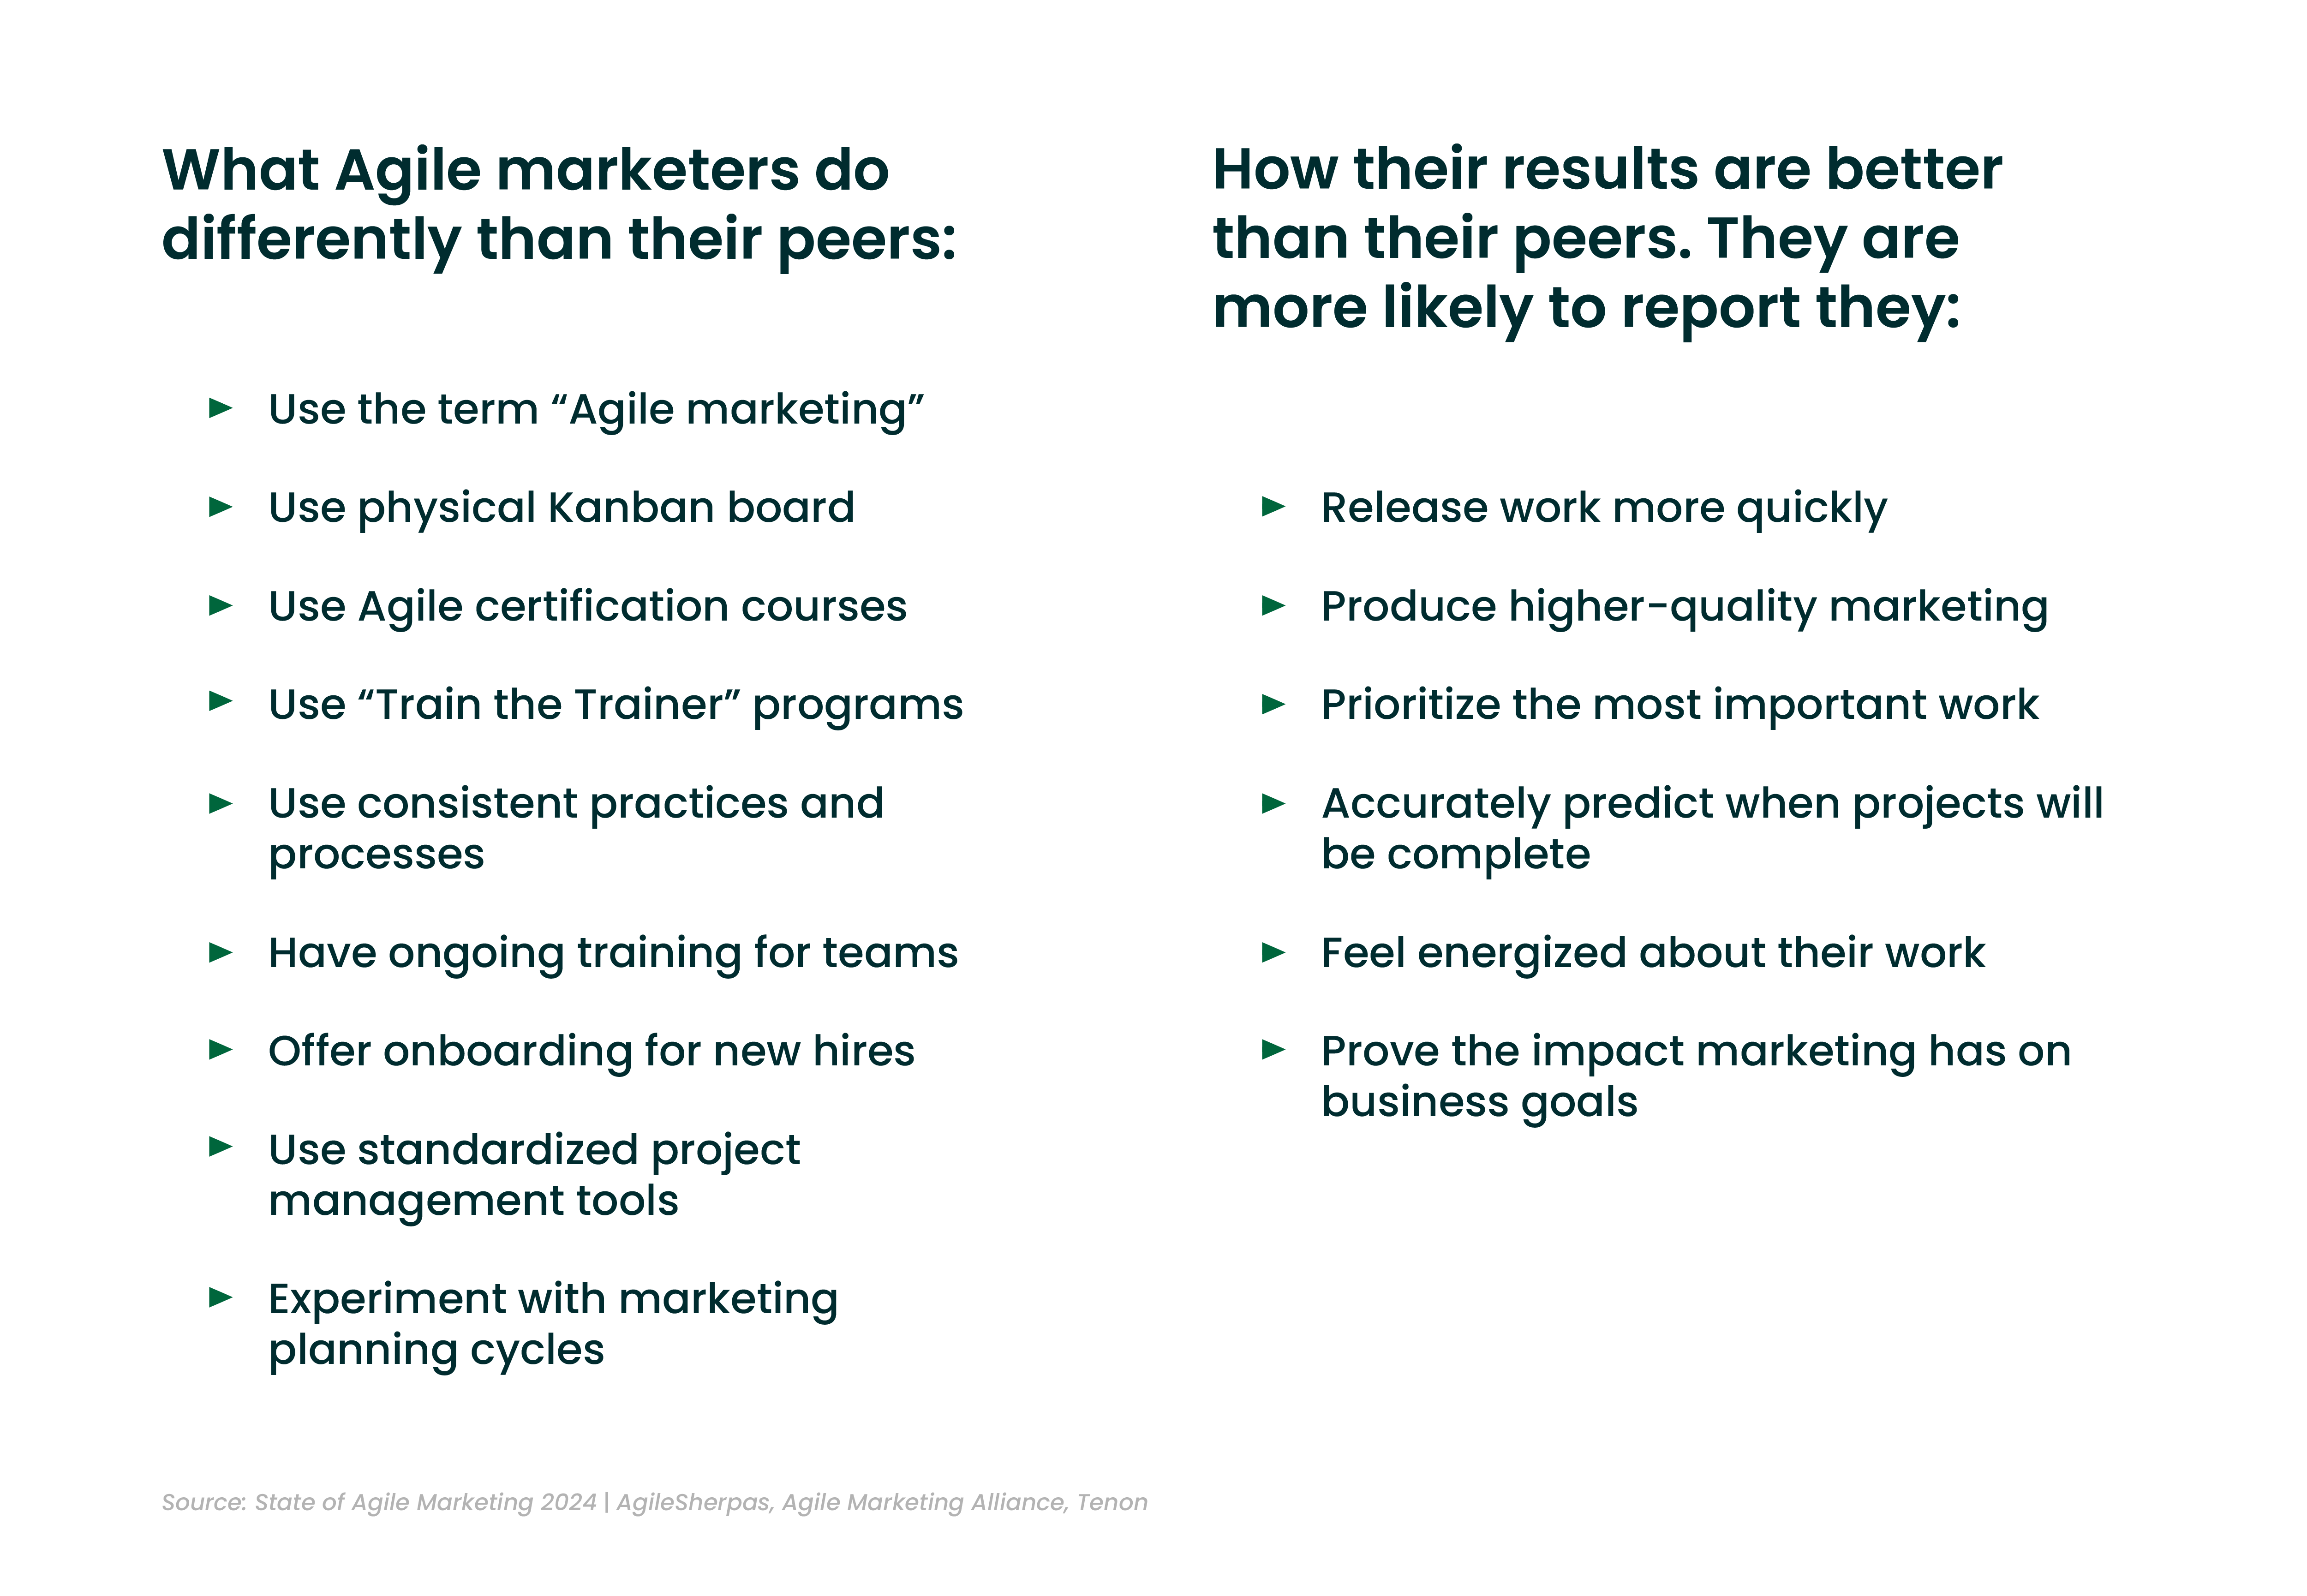 What Agile Marketers Do Differently